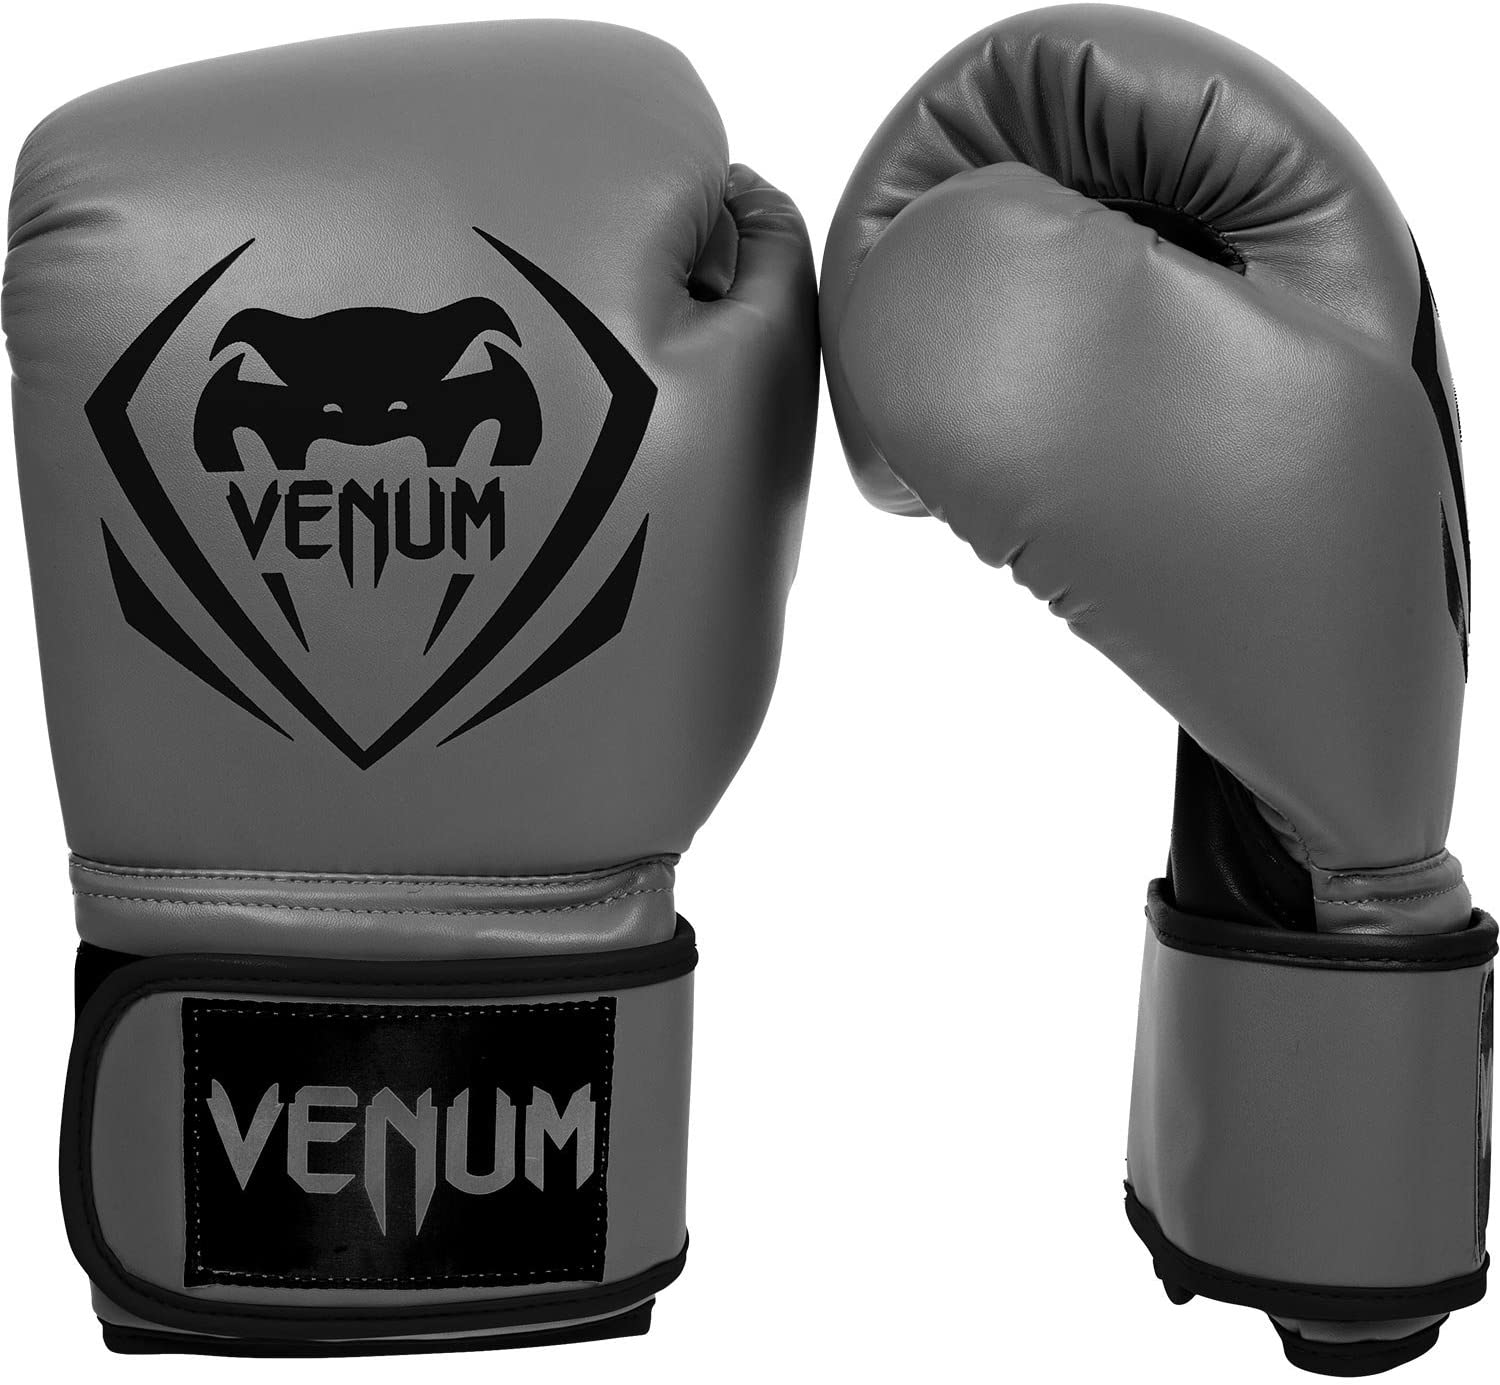 Venum for shadow boxing